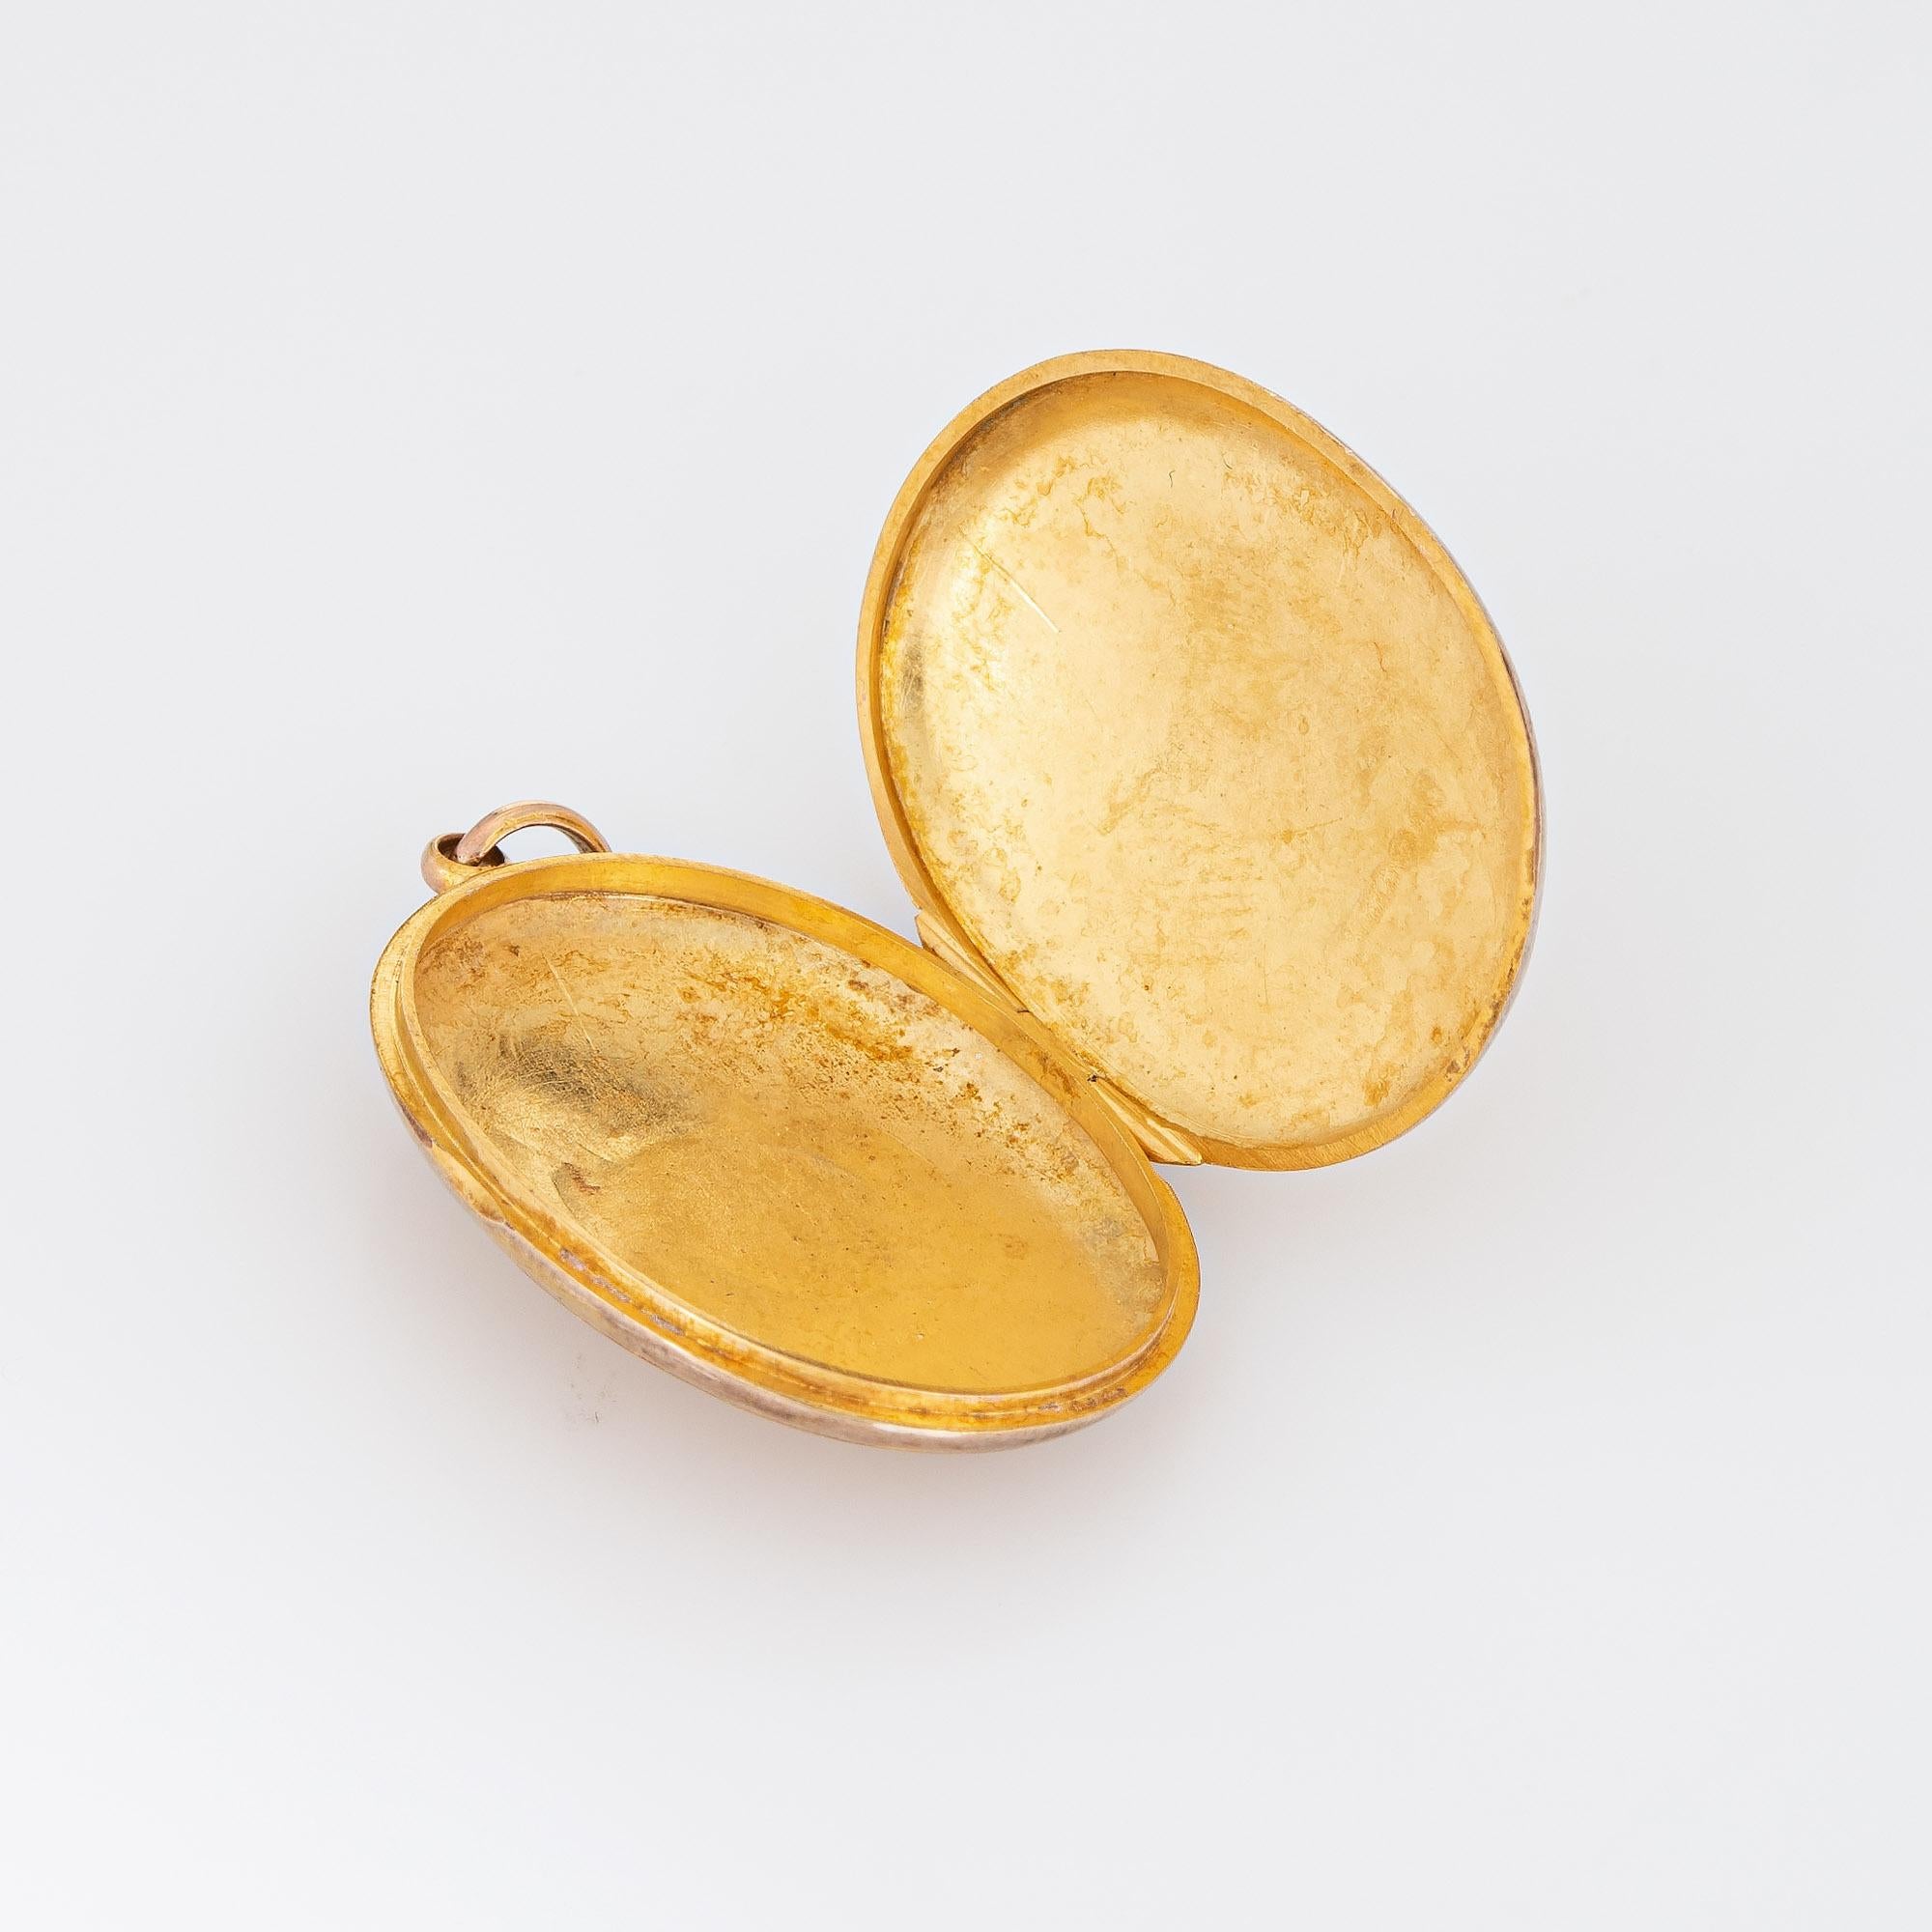 Elegant and finely detailed vintage Art Deco era locket (circa 1918) crafted in 9k yellow gold. 

The oval shaped locket features a decorative engraved floral pattern. Likely given as a wedding or anniversary gift, the locket is engraved 'From A.D